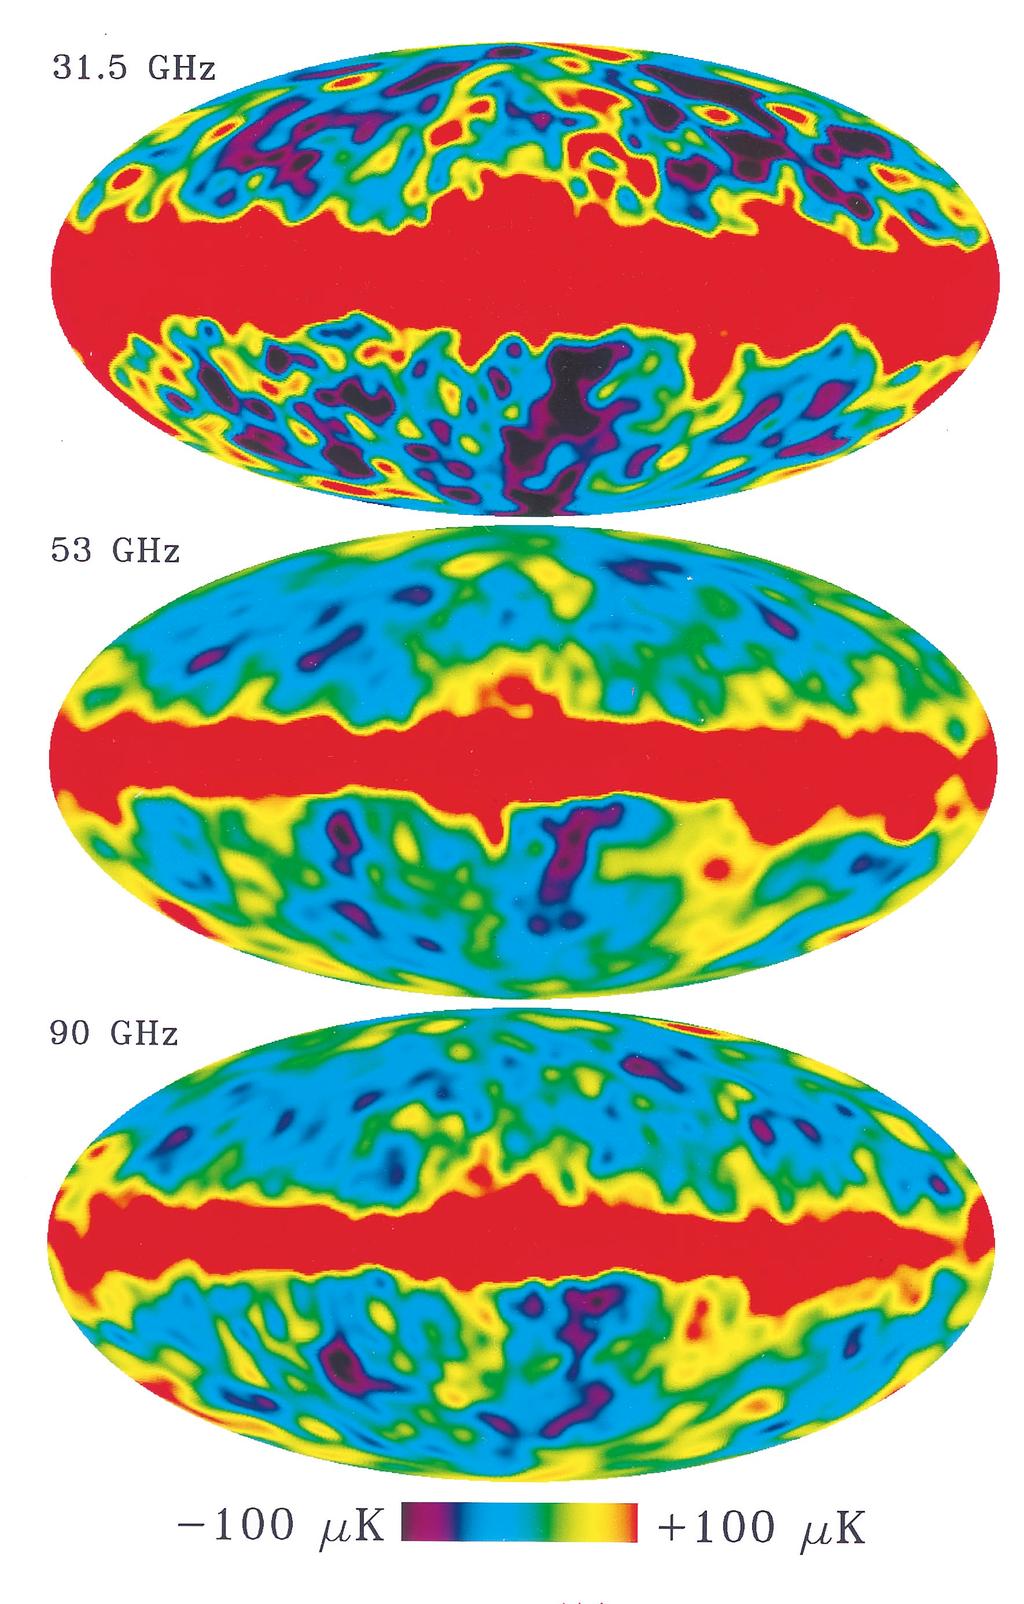 PLATE L1 FIG. 1. Full-sky Mollweide projections of the 31, 53, and 90 GHz 4 yr maps formed by averaging the A and B channels at each frequency.